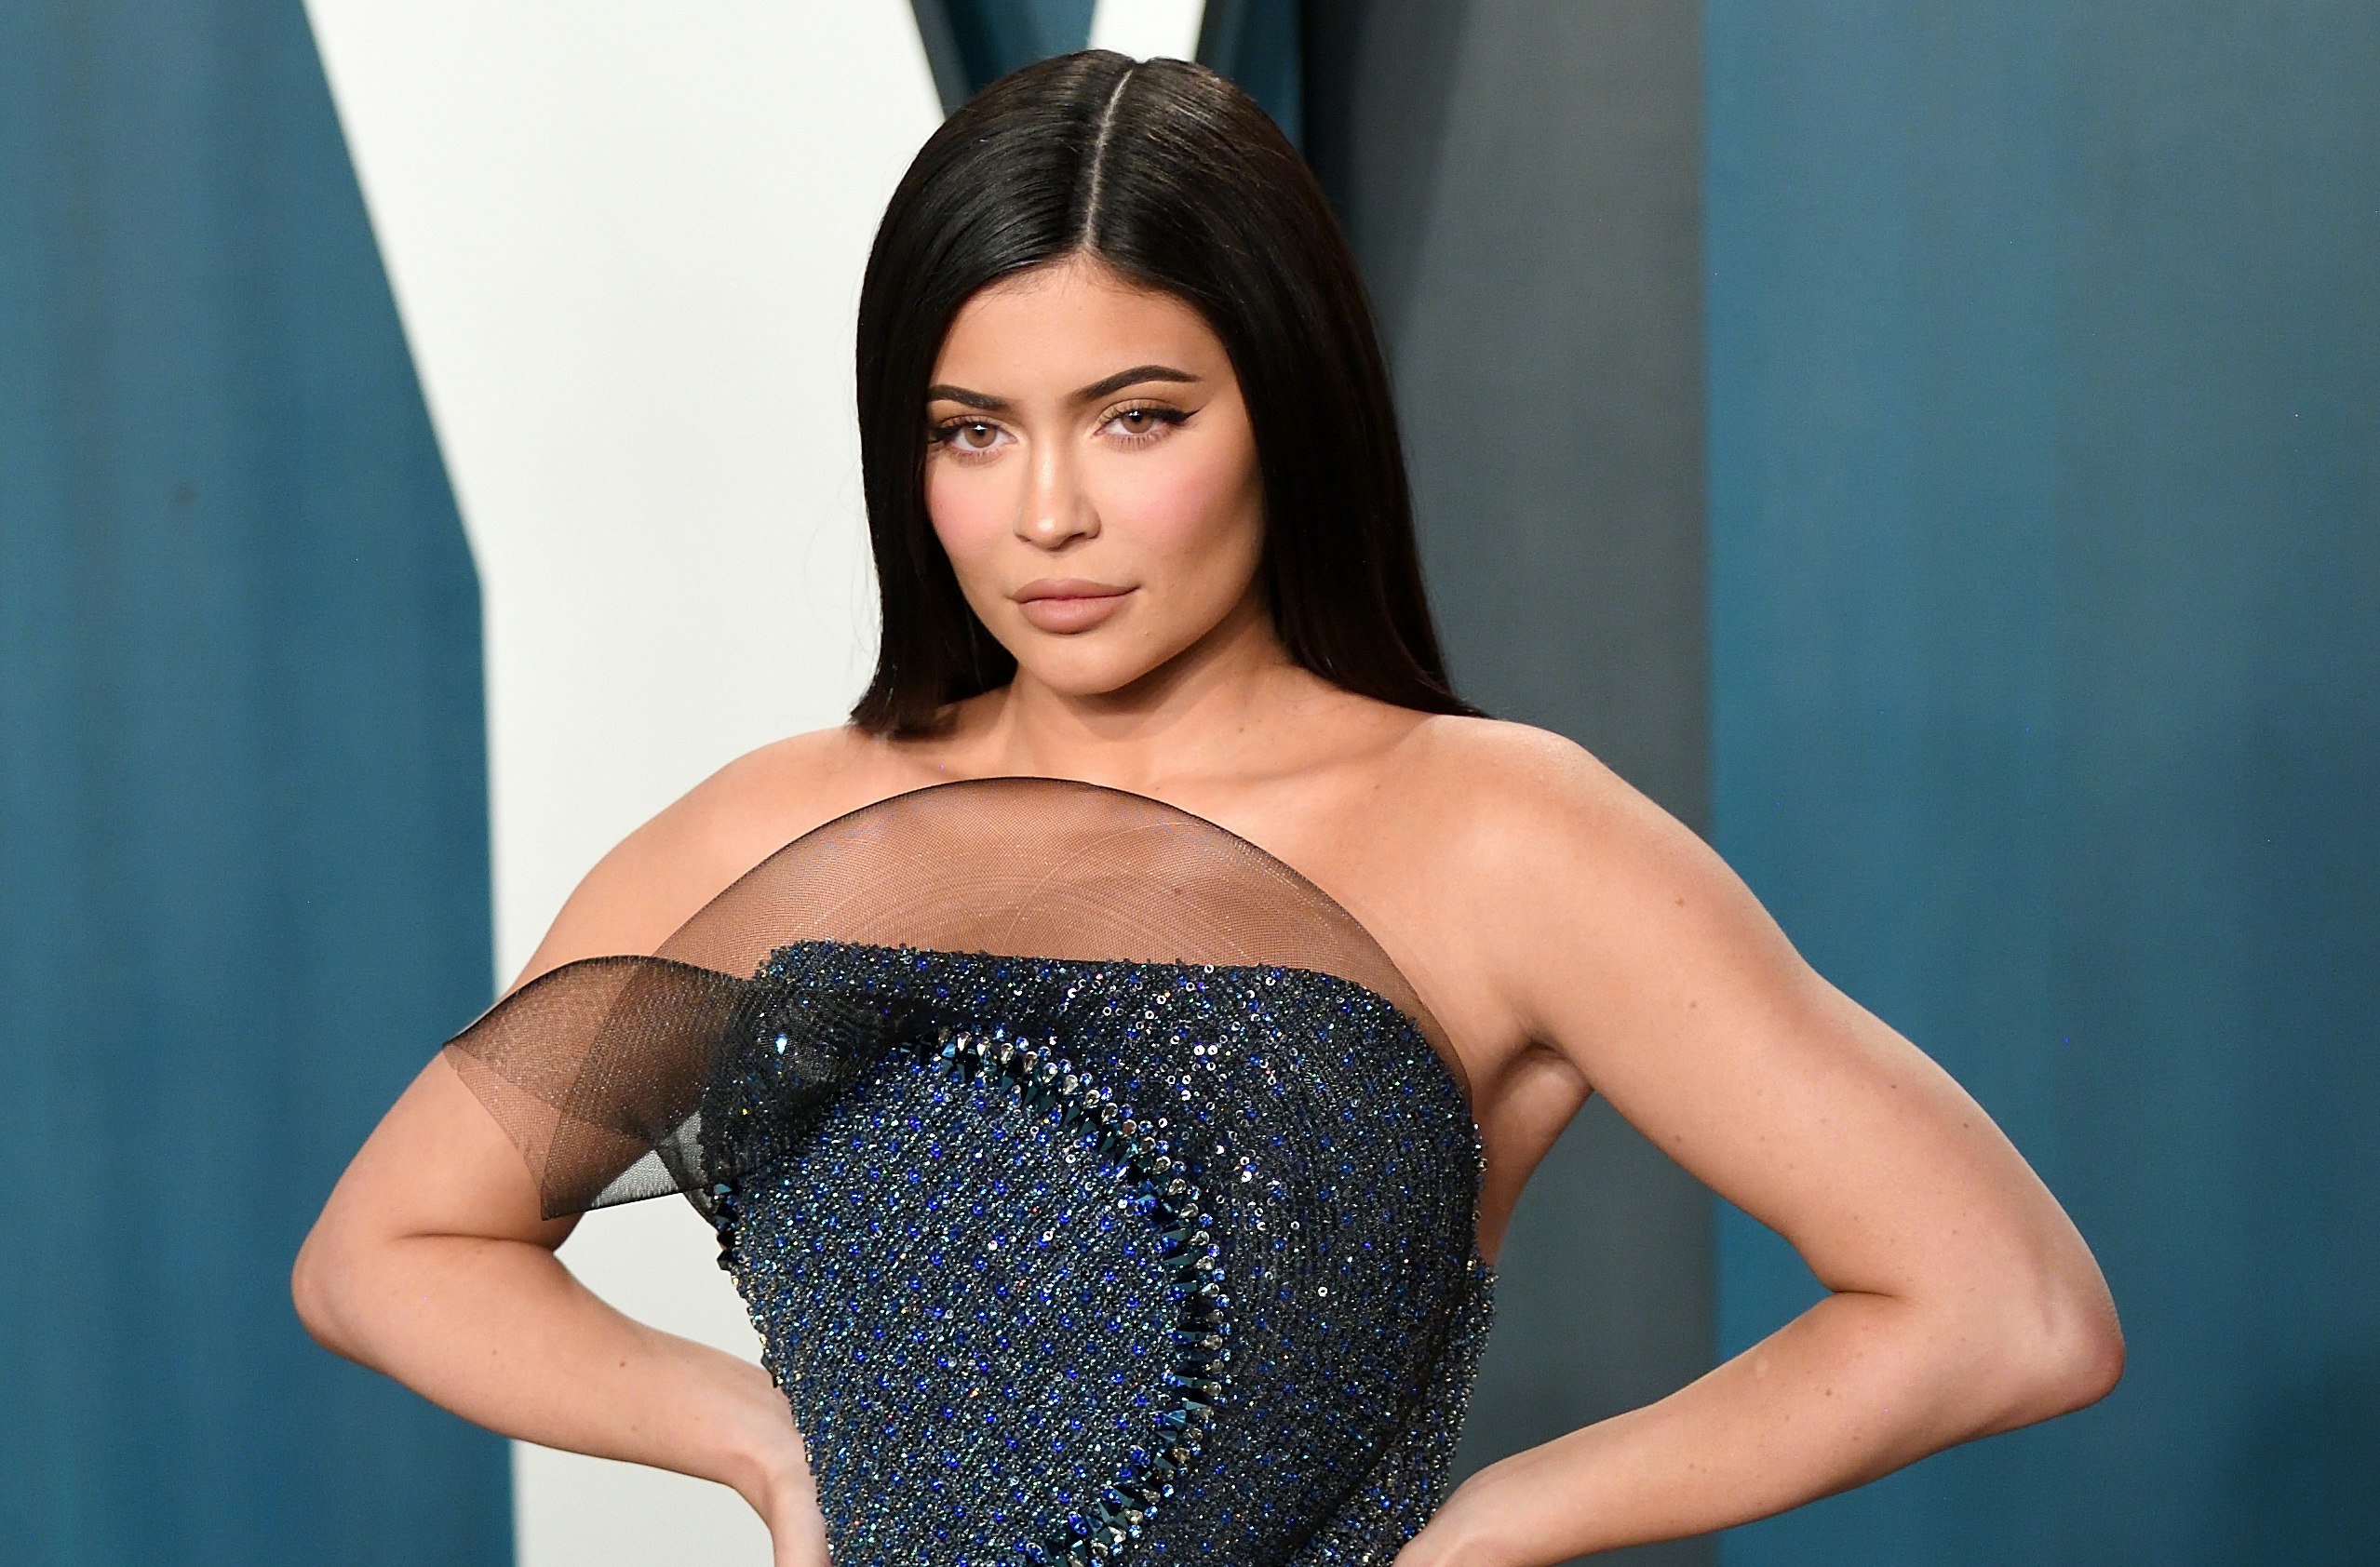 Stars With $1 Million Handbag Collections: Pics Of Kylie Jenner